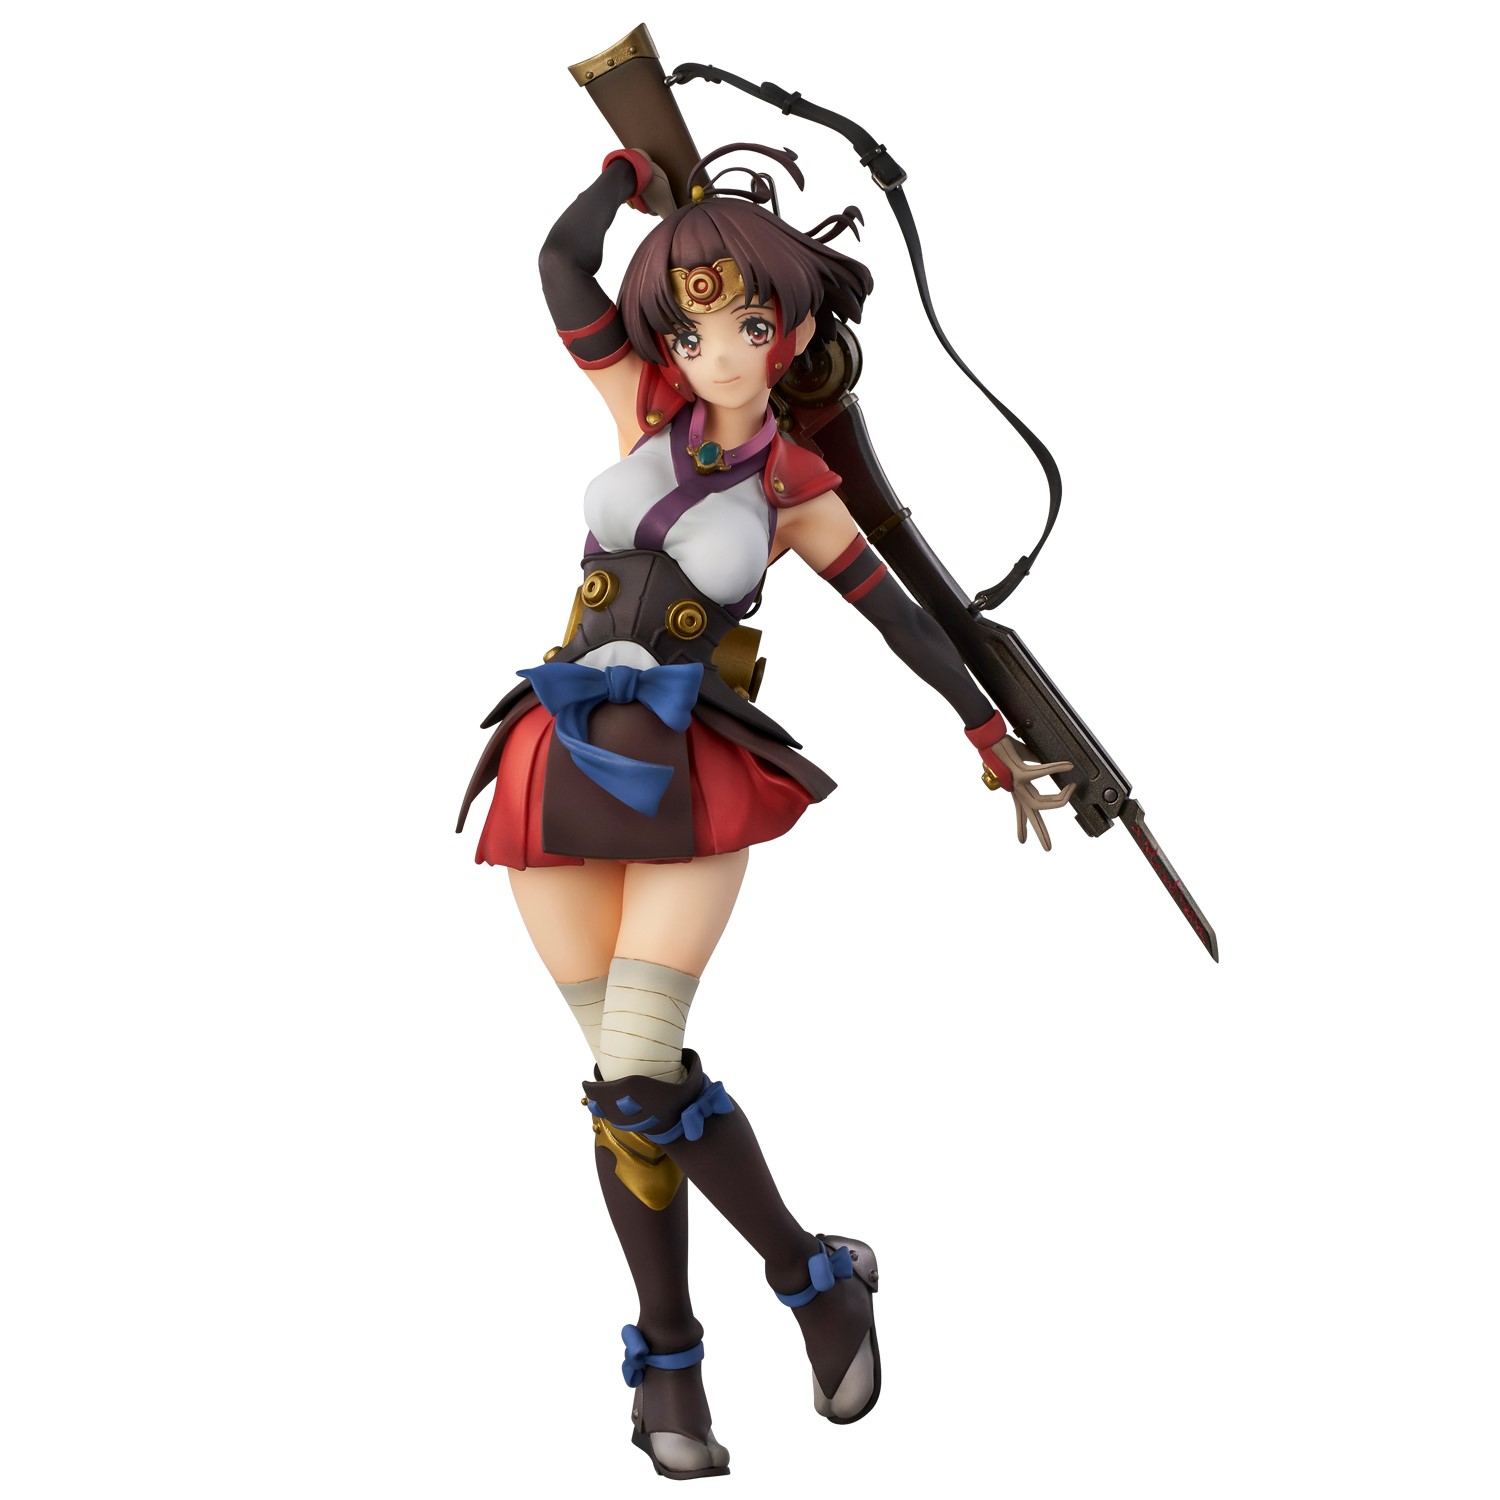 KABANERI OF THE IRON FORTRESS 1/6 SCALE PRE-PAINTED FIGURE: MUMEI THE BATTLE OF UNATO VER. Union Creative